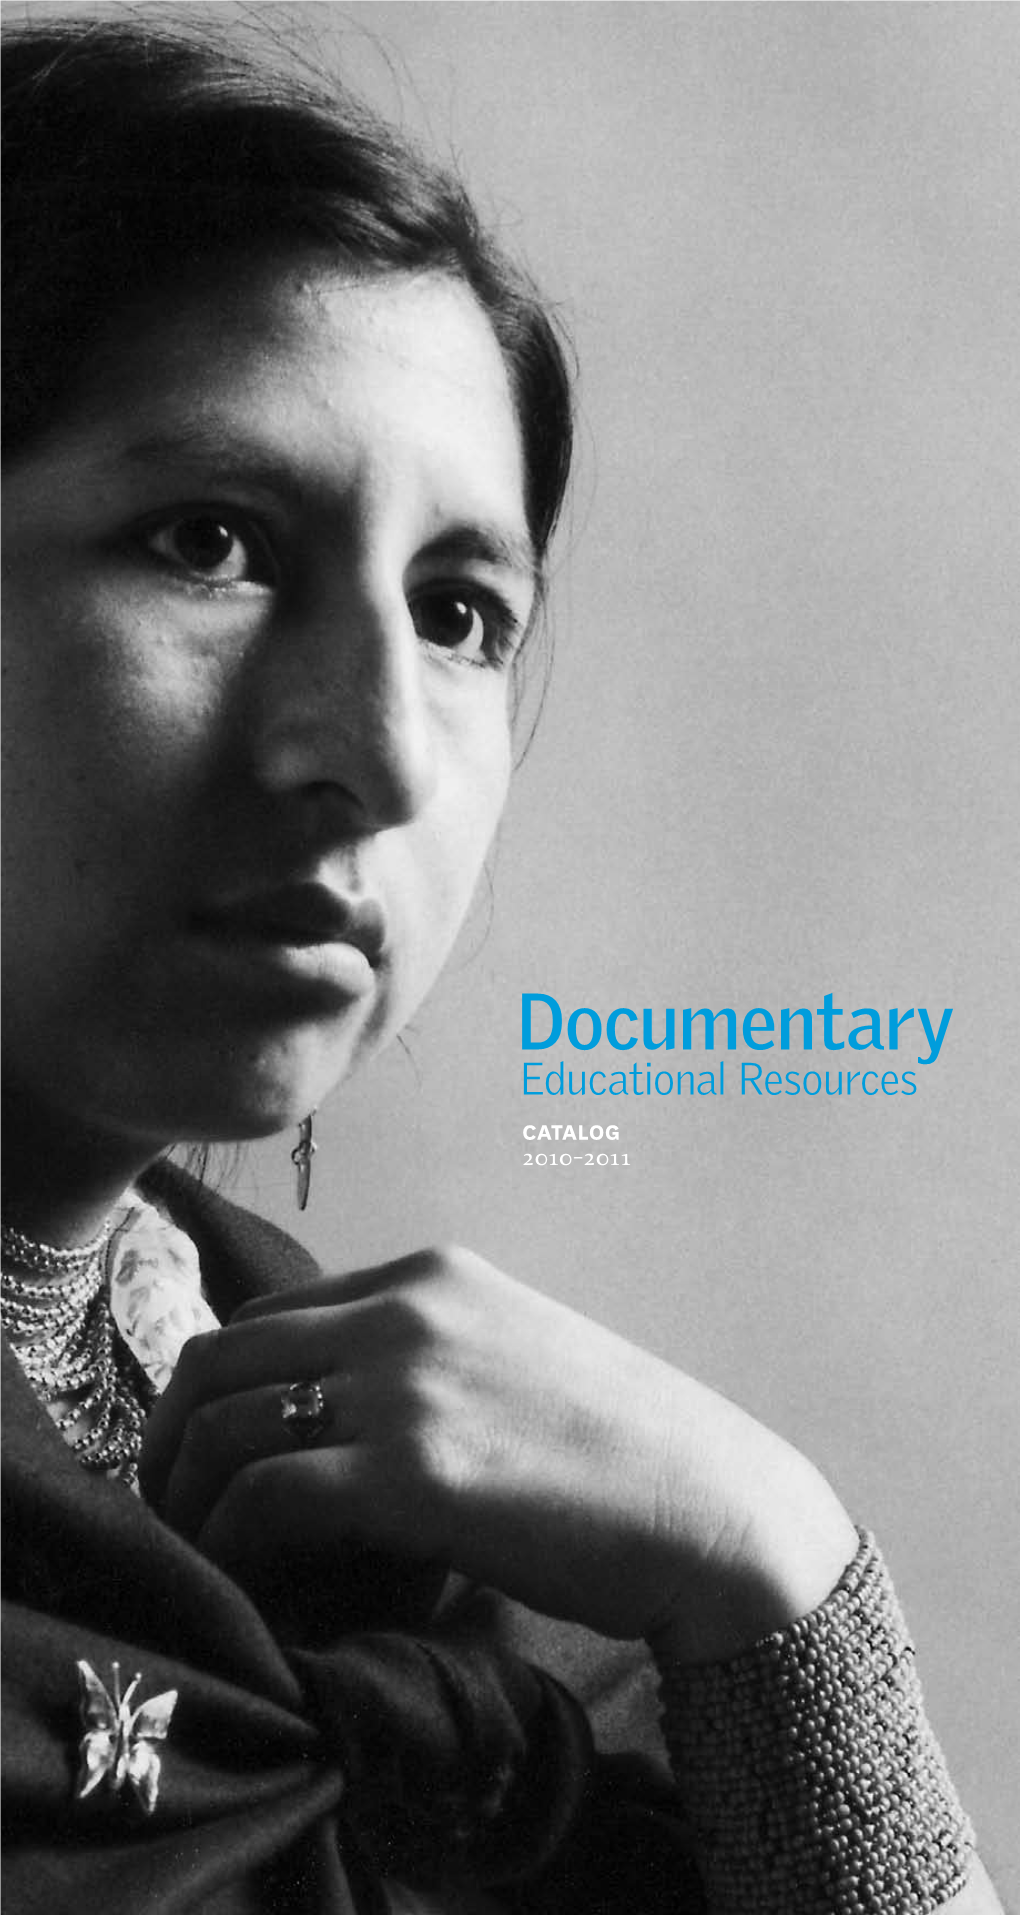 Documentary Educational Resources